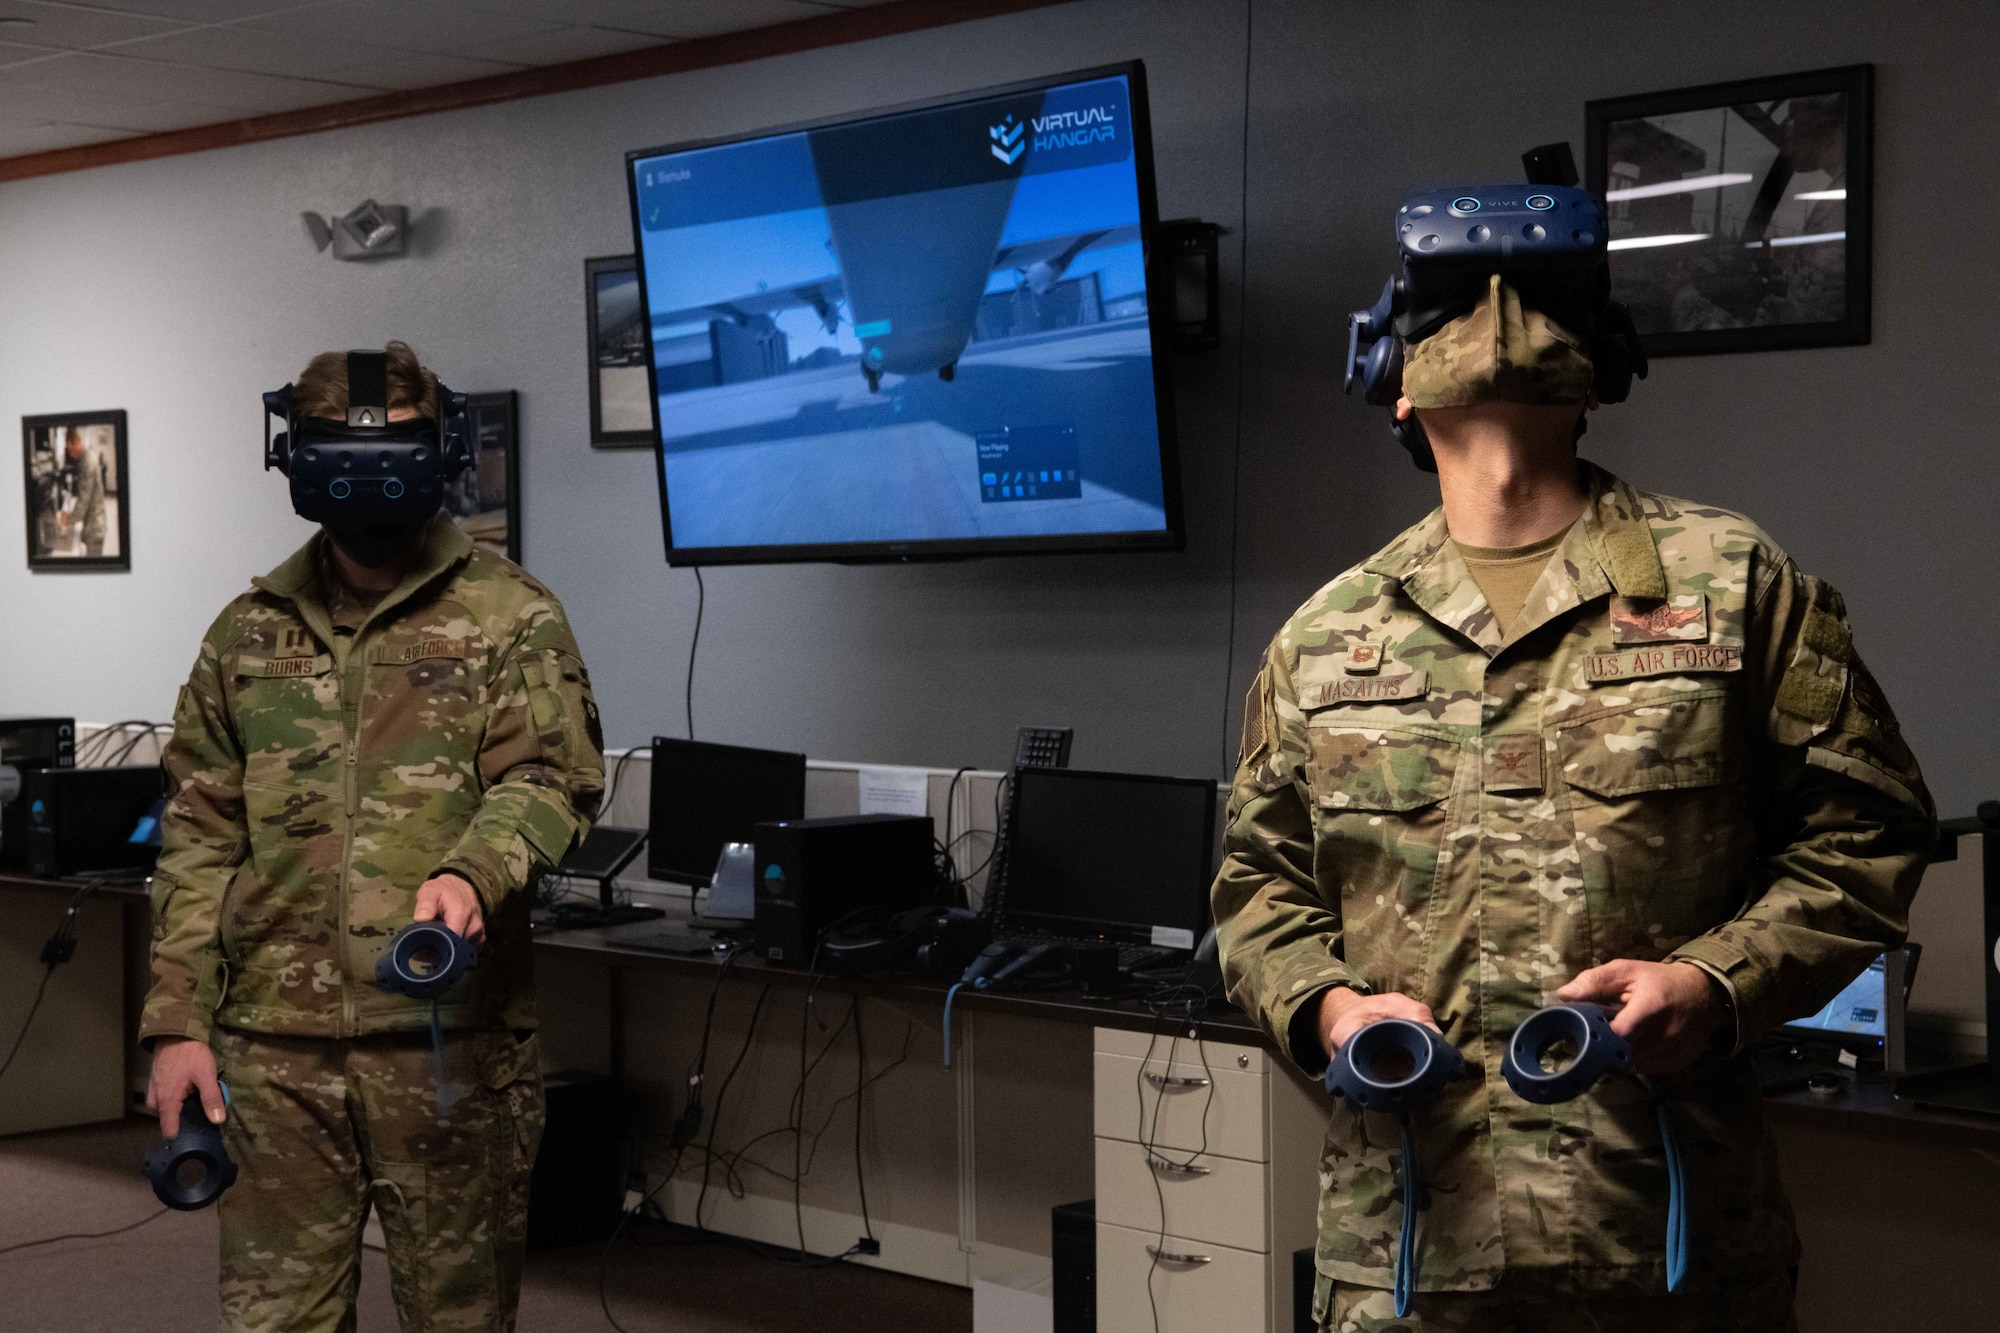 U.S. Air Force Capt. Peter Burns, 20th Special Operations Squadron CV-22 Osprey pilot, and U.S. Air Force Col. Robert Masaitis, 27th Special Operations Wing commander, experience an MC-130J Commando II aircraft virtual reality maintenance training program during an Air Education and Training Command Integrated Technology Platform demonstration April 15, 2021, at Cannon Air Force Base, N.M. Event coordinators introduced Cannon leaders to acquisition contractors and discussed how to get fully operational training programs assimilated into squadrons. (U.S. Air Force photo by Staff Sgt. Peter Reft)